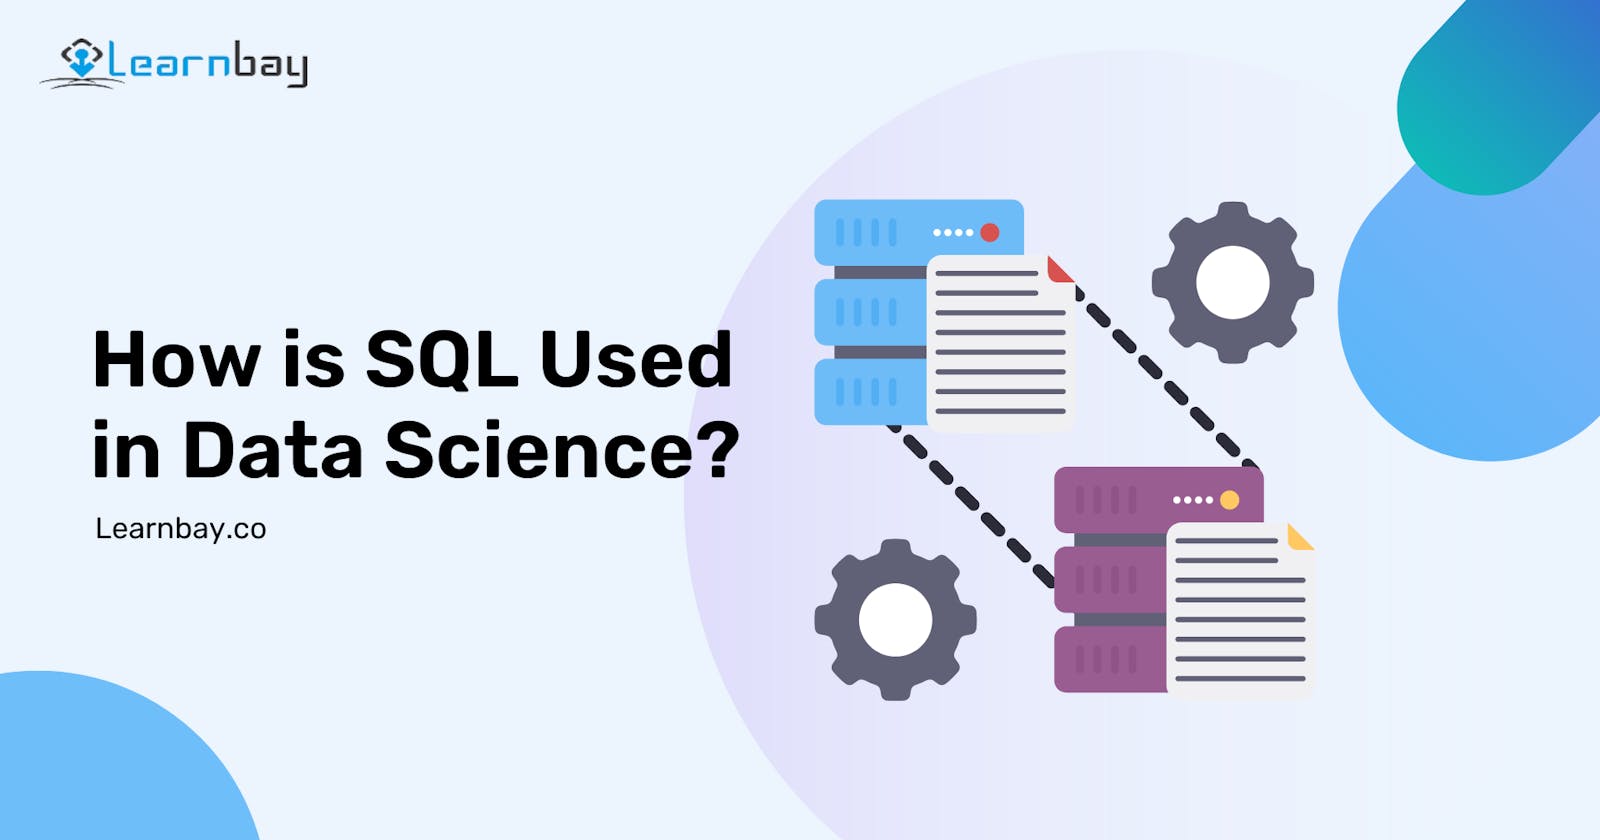 How is SQL Used in Data Science?